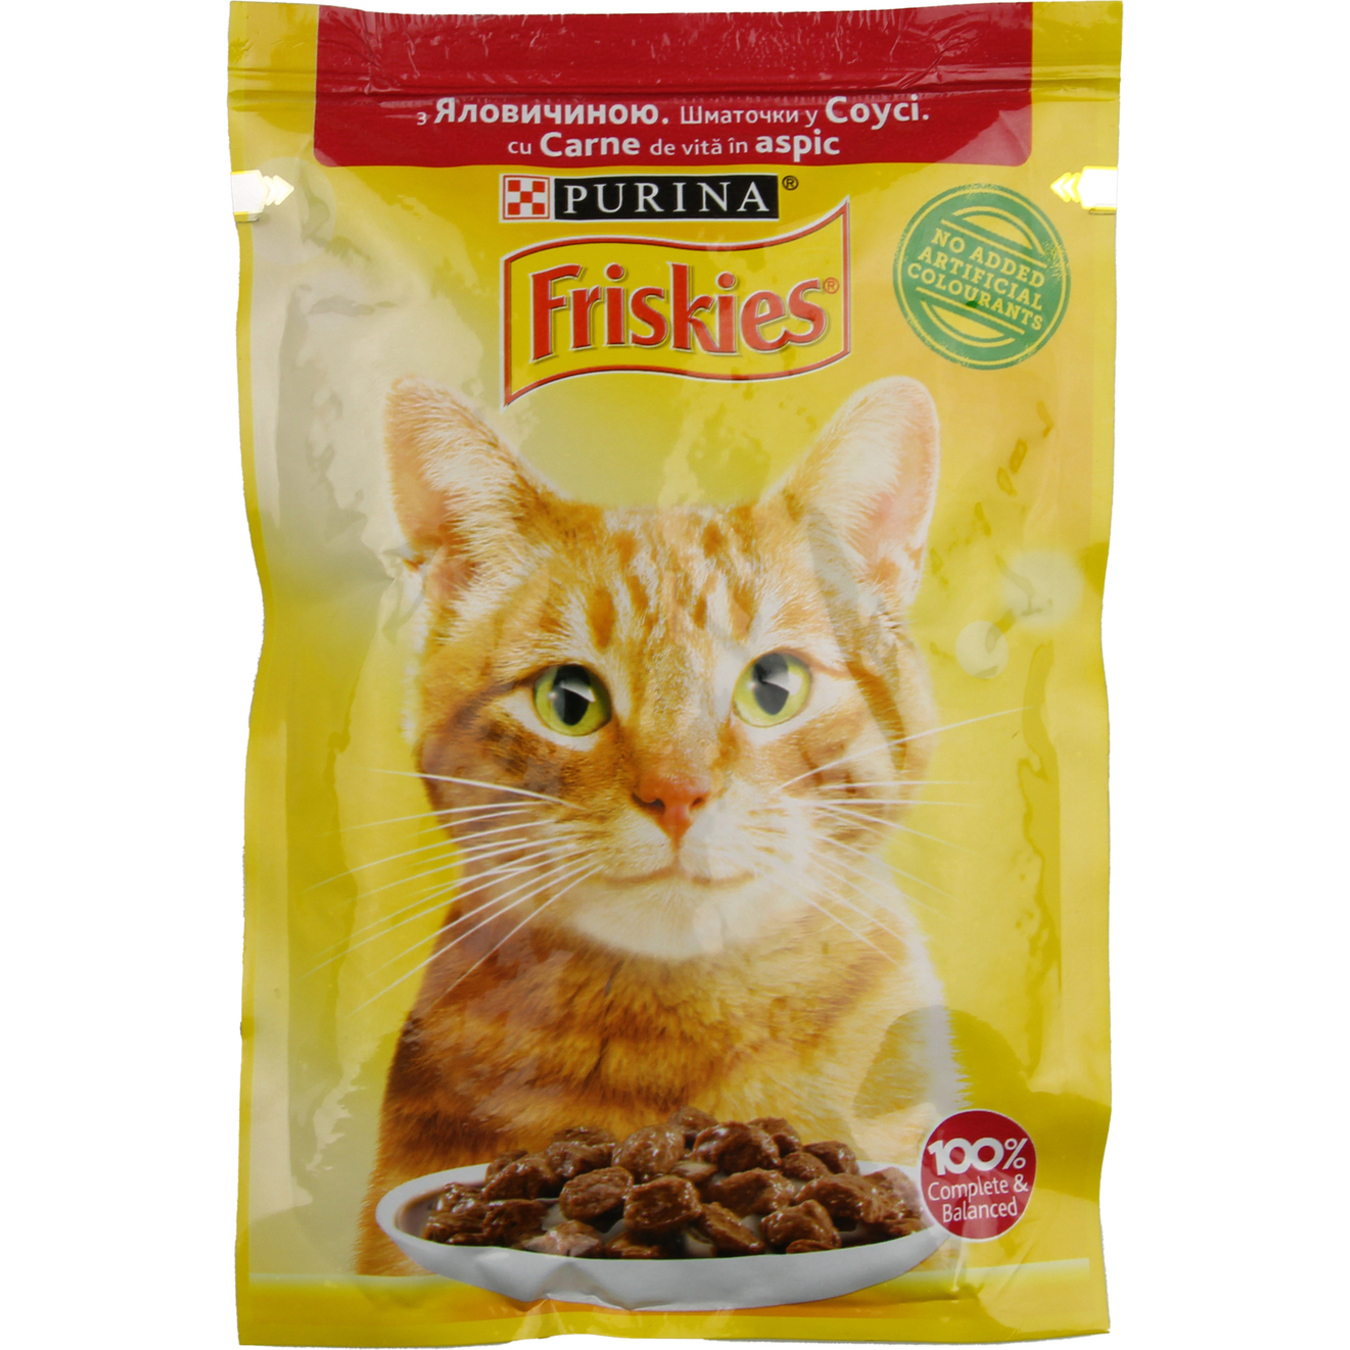 Purina Friskies Cats Food with Beef Pieces in Sauce 85g